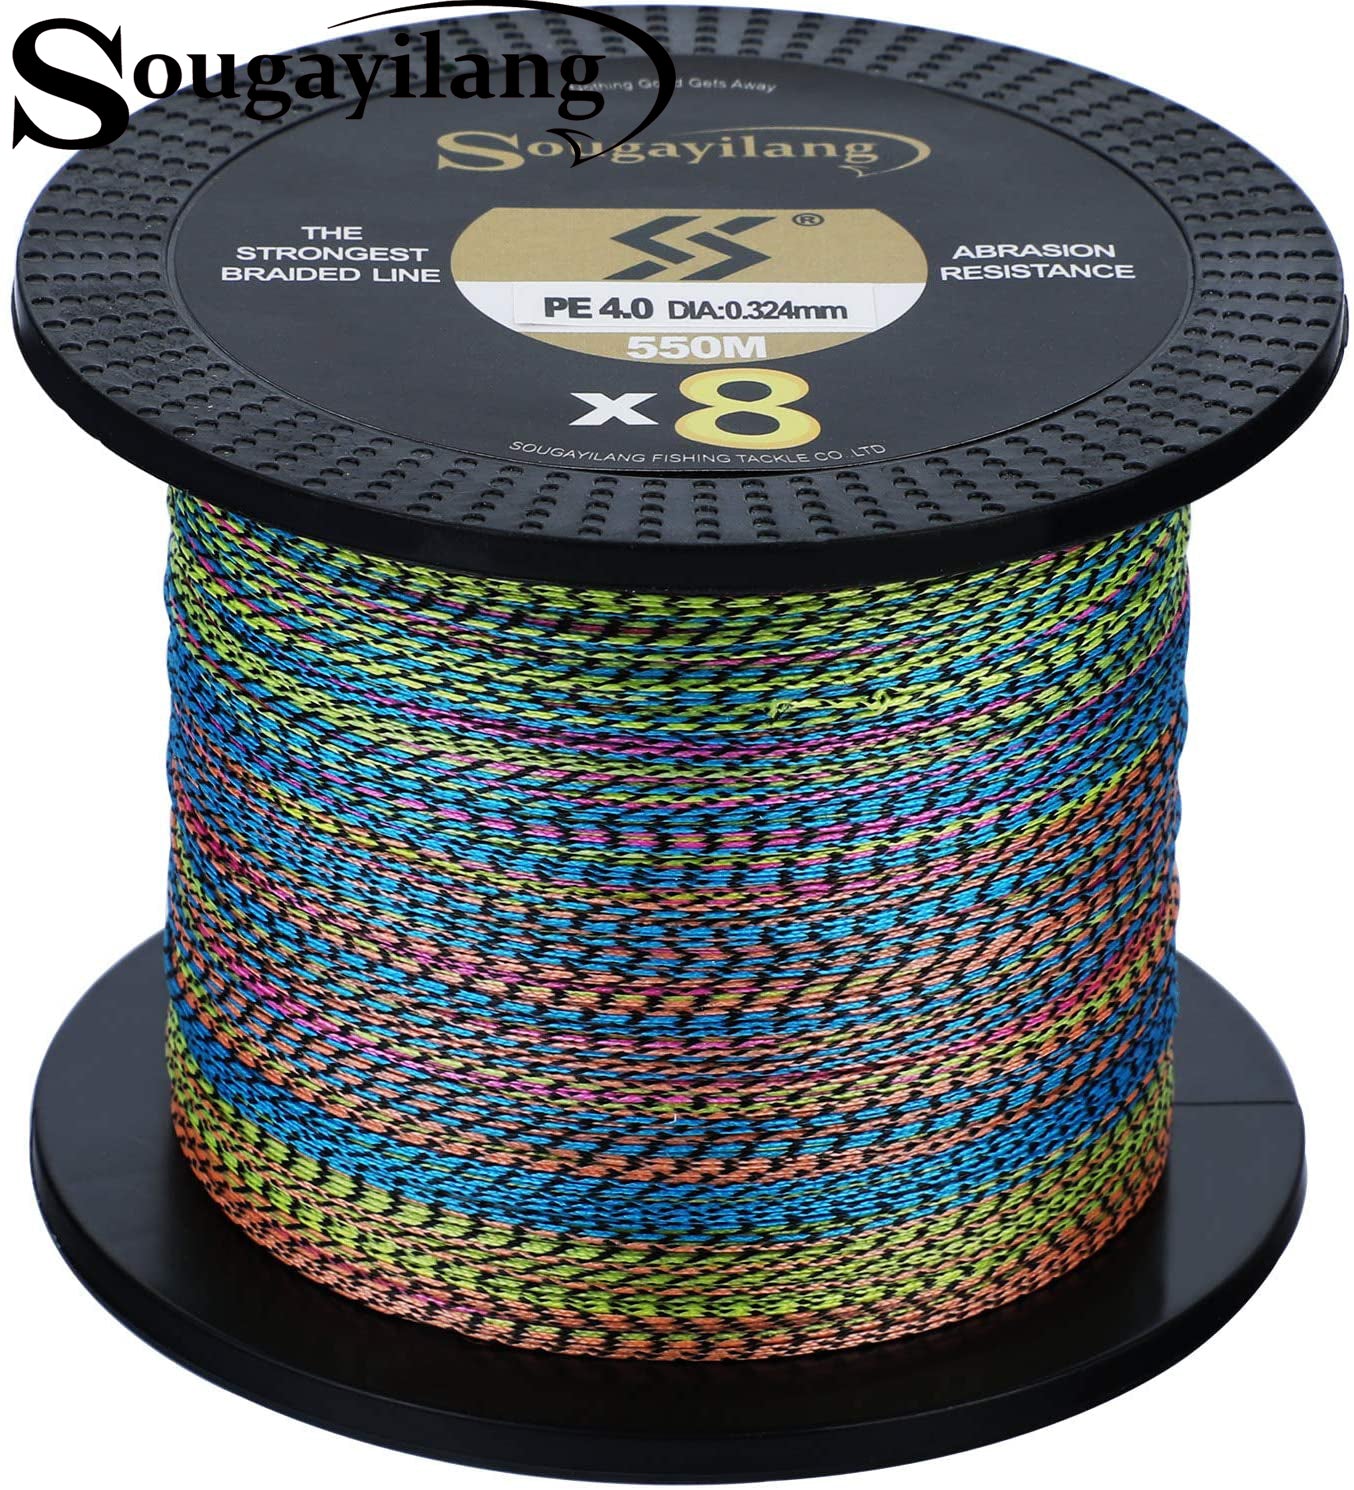 Mounchain Braided Fishing Line 1000M, 8 Strands Abrasion Resistant